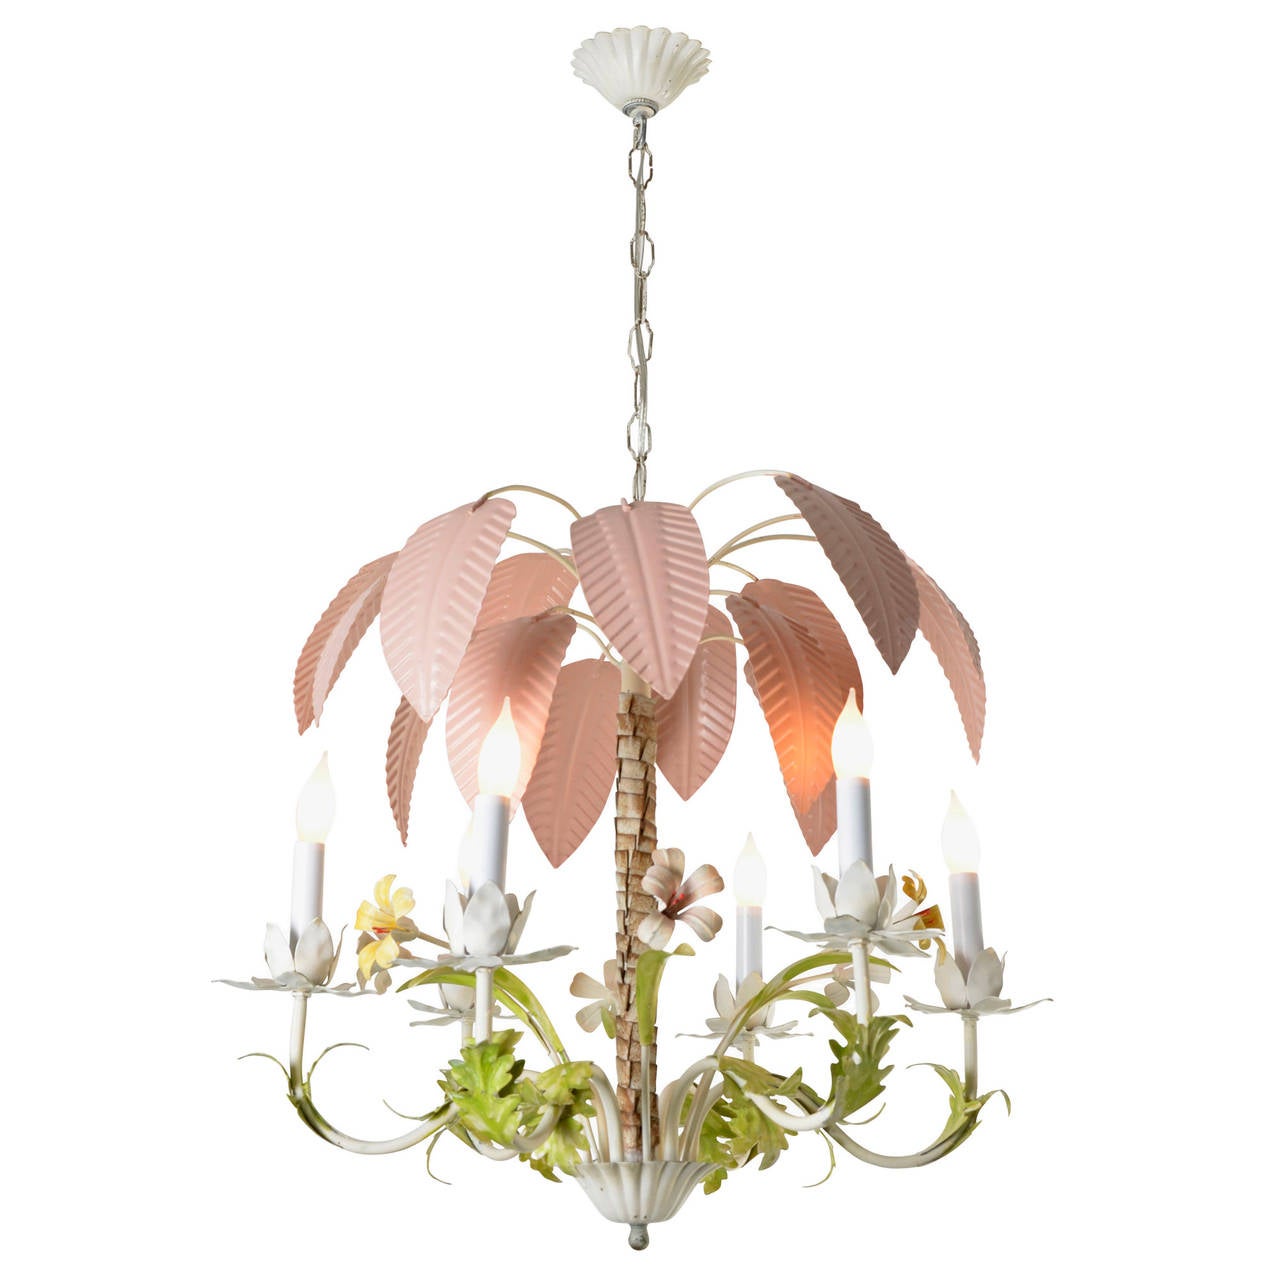 What's not to love about this enchanting palm tree chandelier? As a modern take on the European tradition of toleware, this 6-light fixture combines the 18th century techniques of stamping and painting steel with an exuberant, modern motif. This